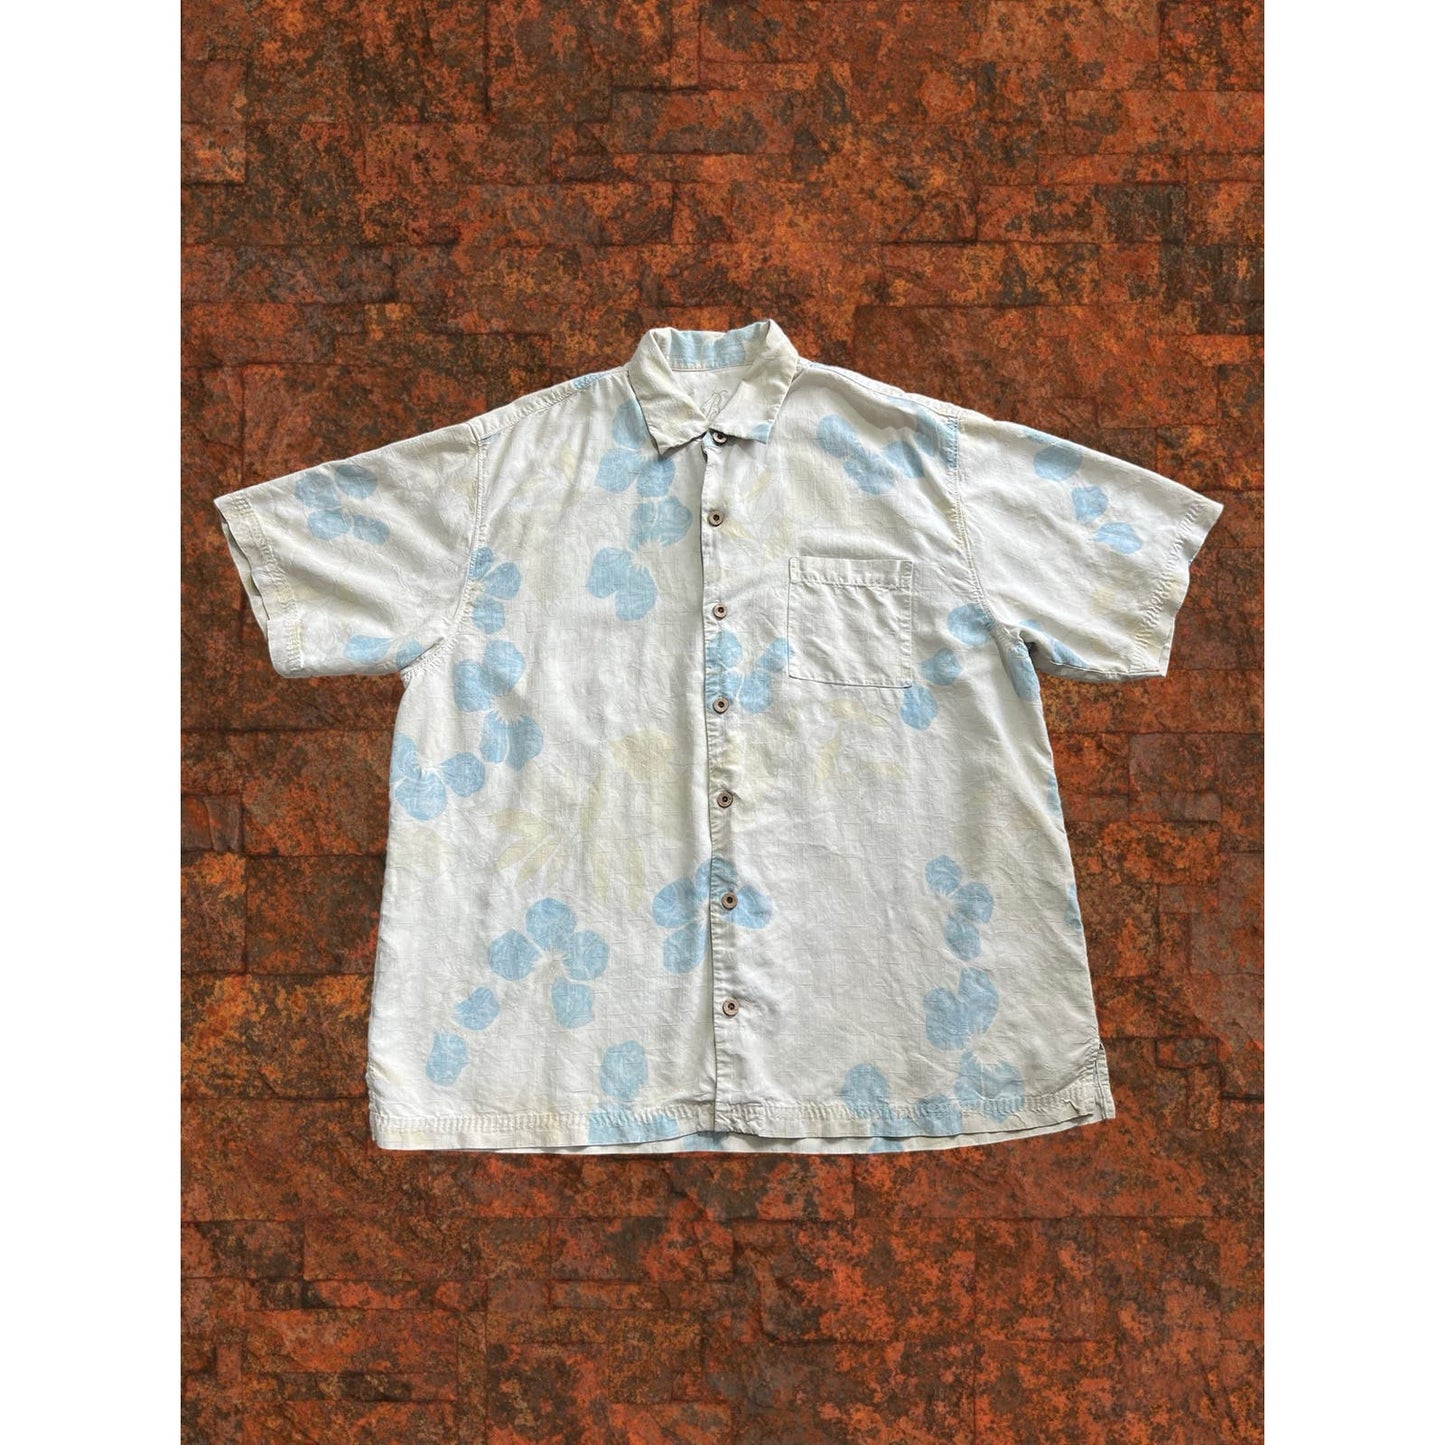 Tommy Bahama Silk casual Button up shirt